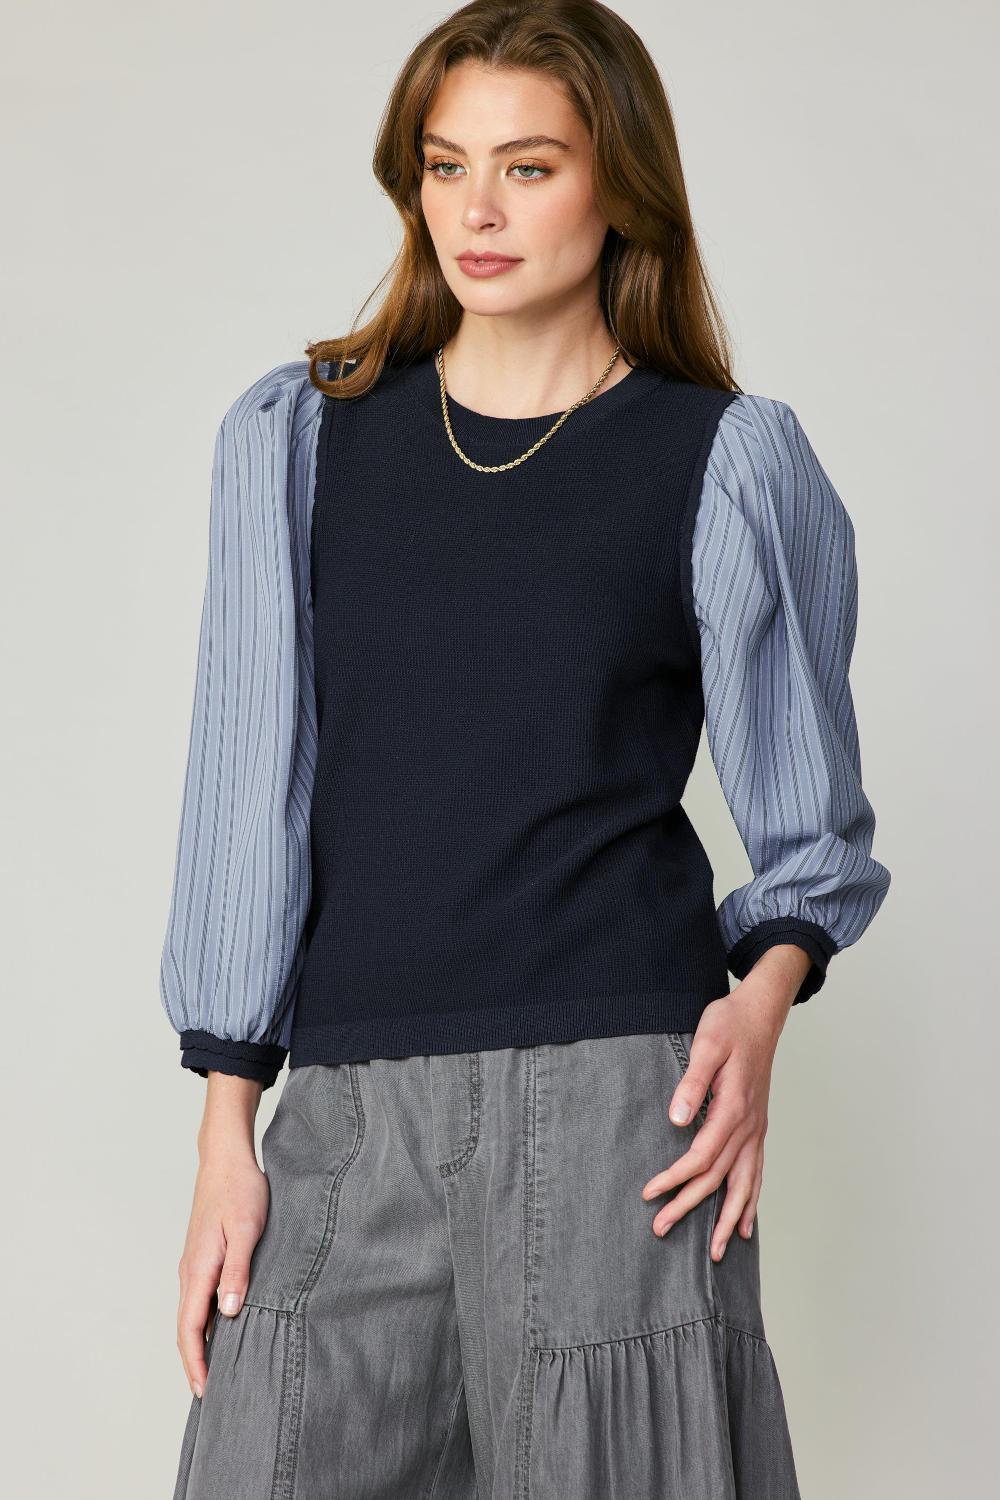 Navy Contrast Top - Strawberry Moon Boutique